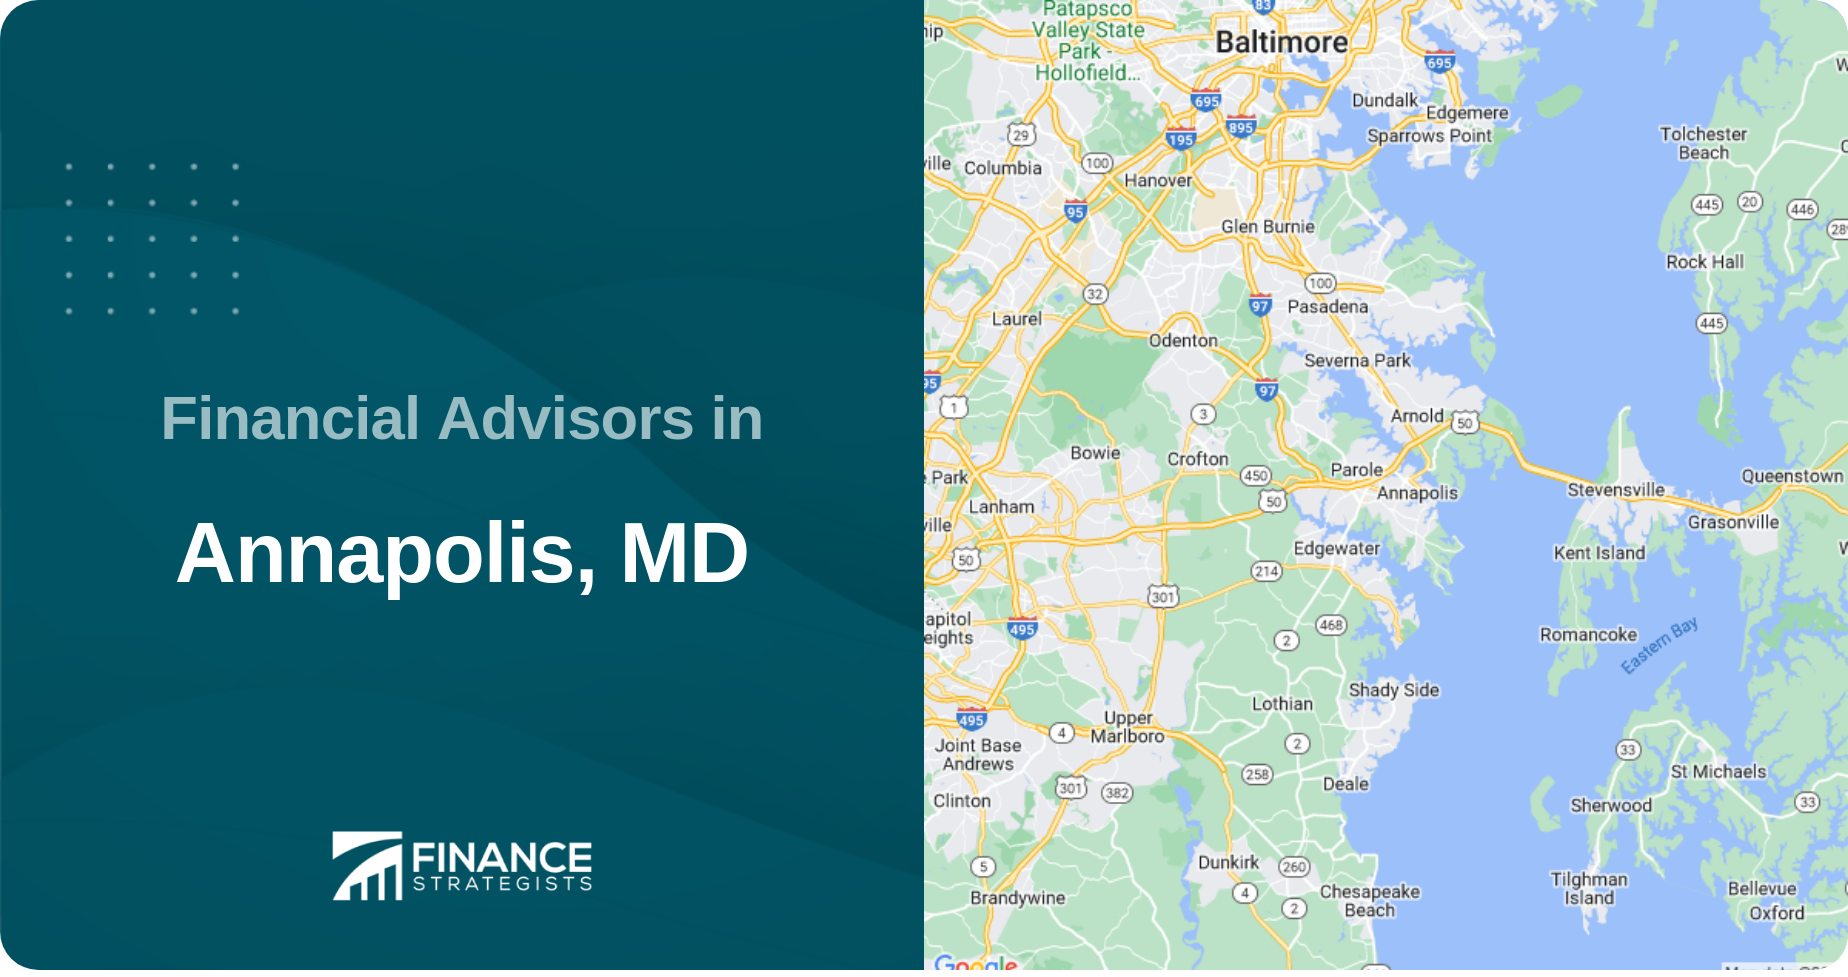 Financial Advisors in Annapolis, MD